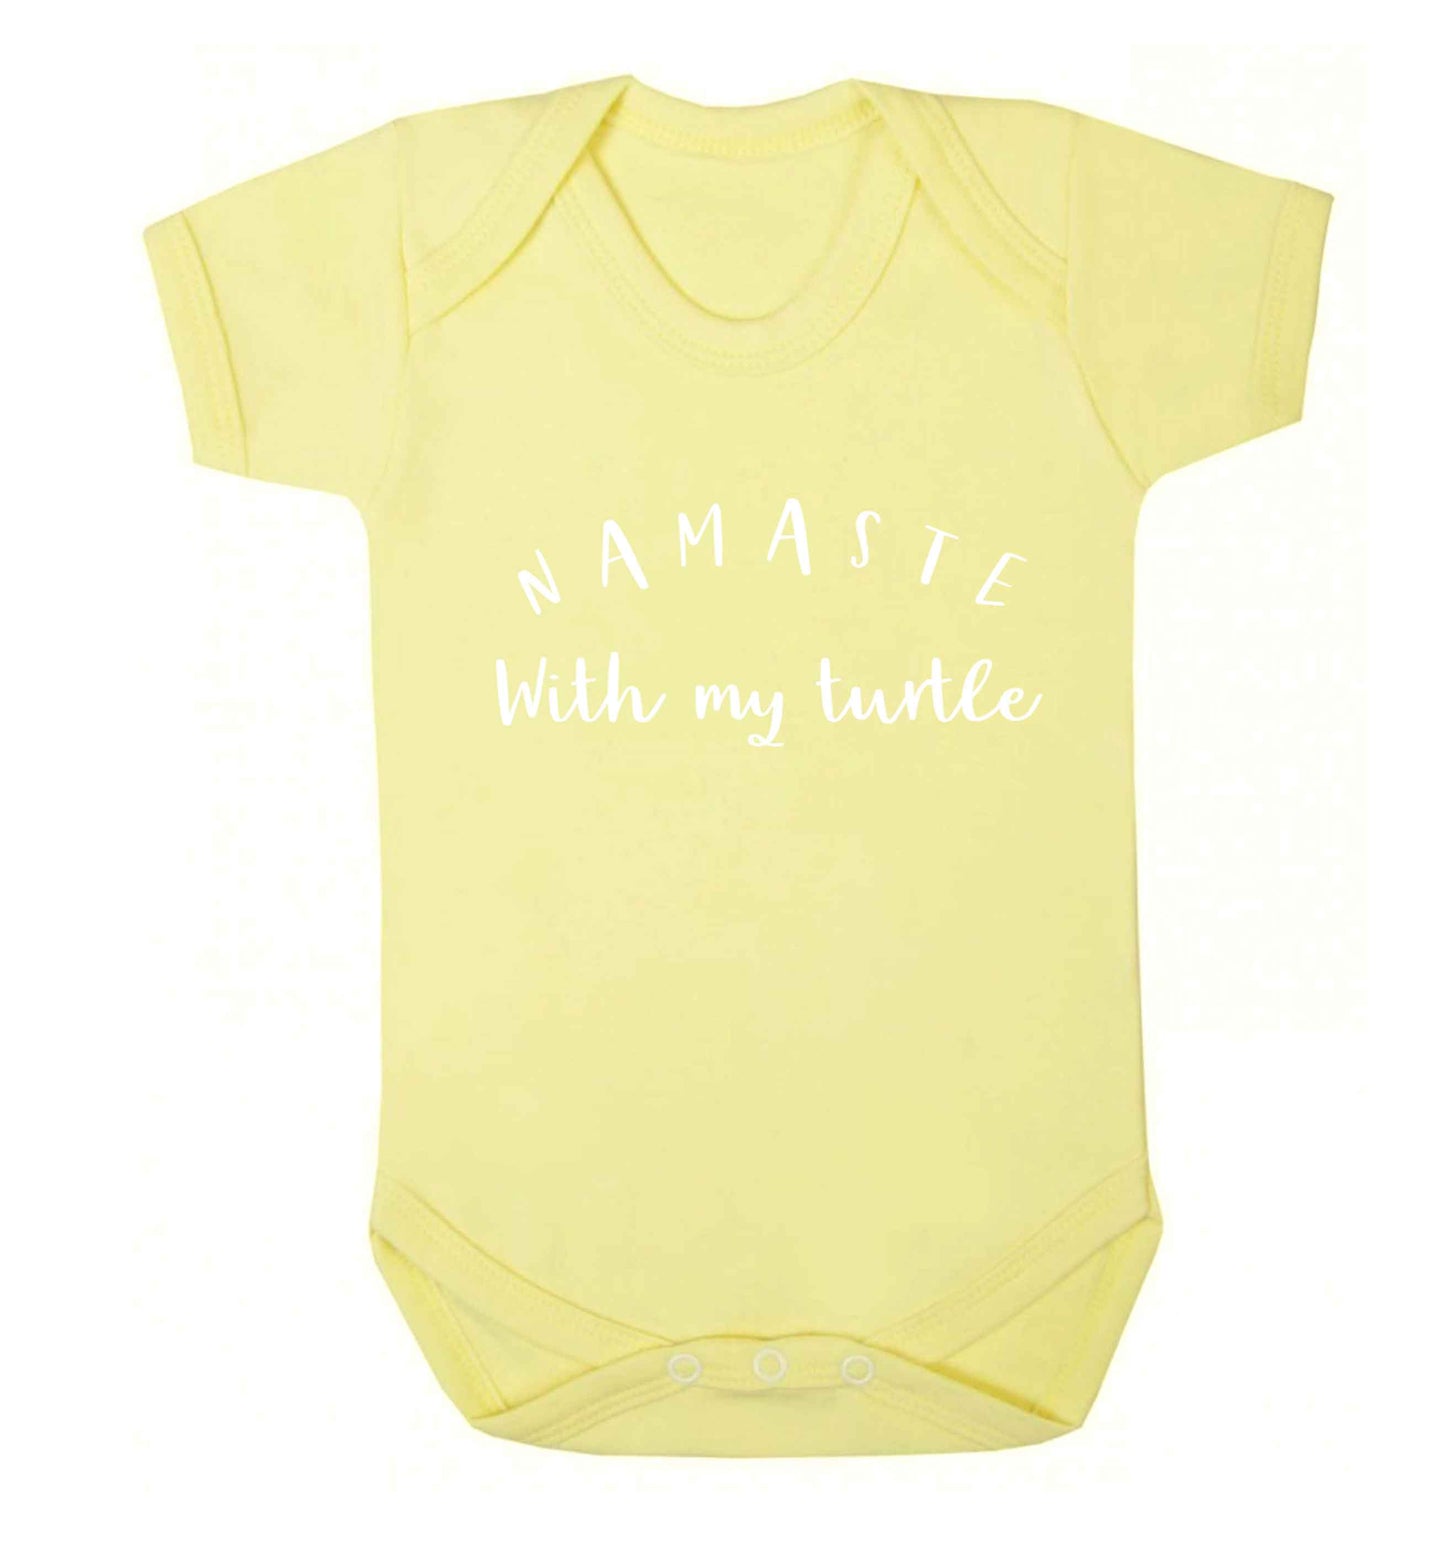 Namaste with my turtle Baby Vest pale yellow 18-24 months